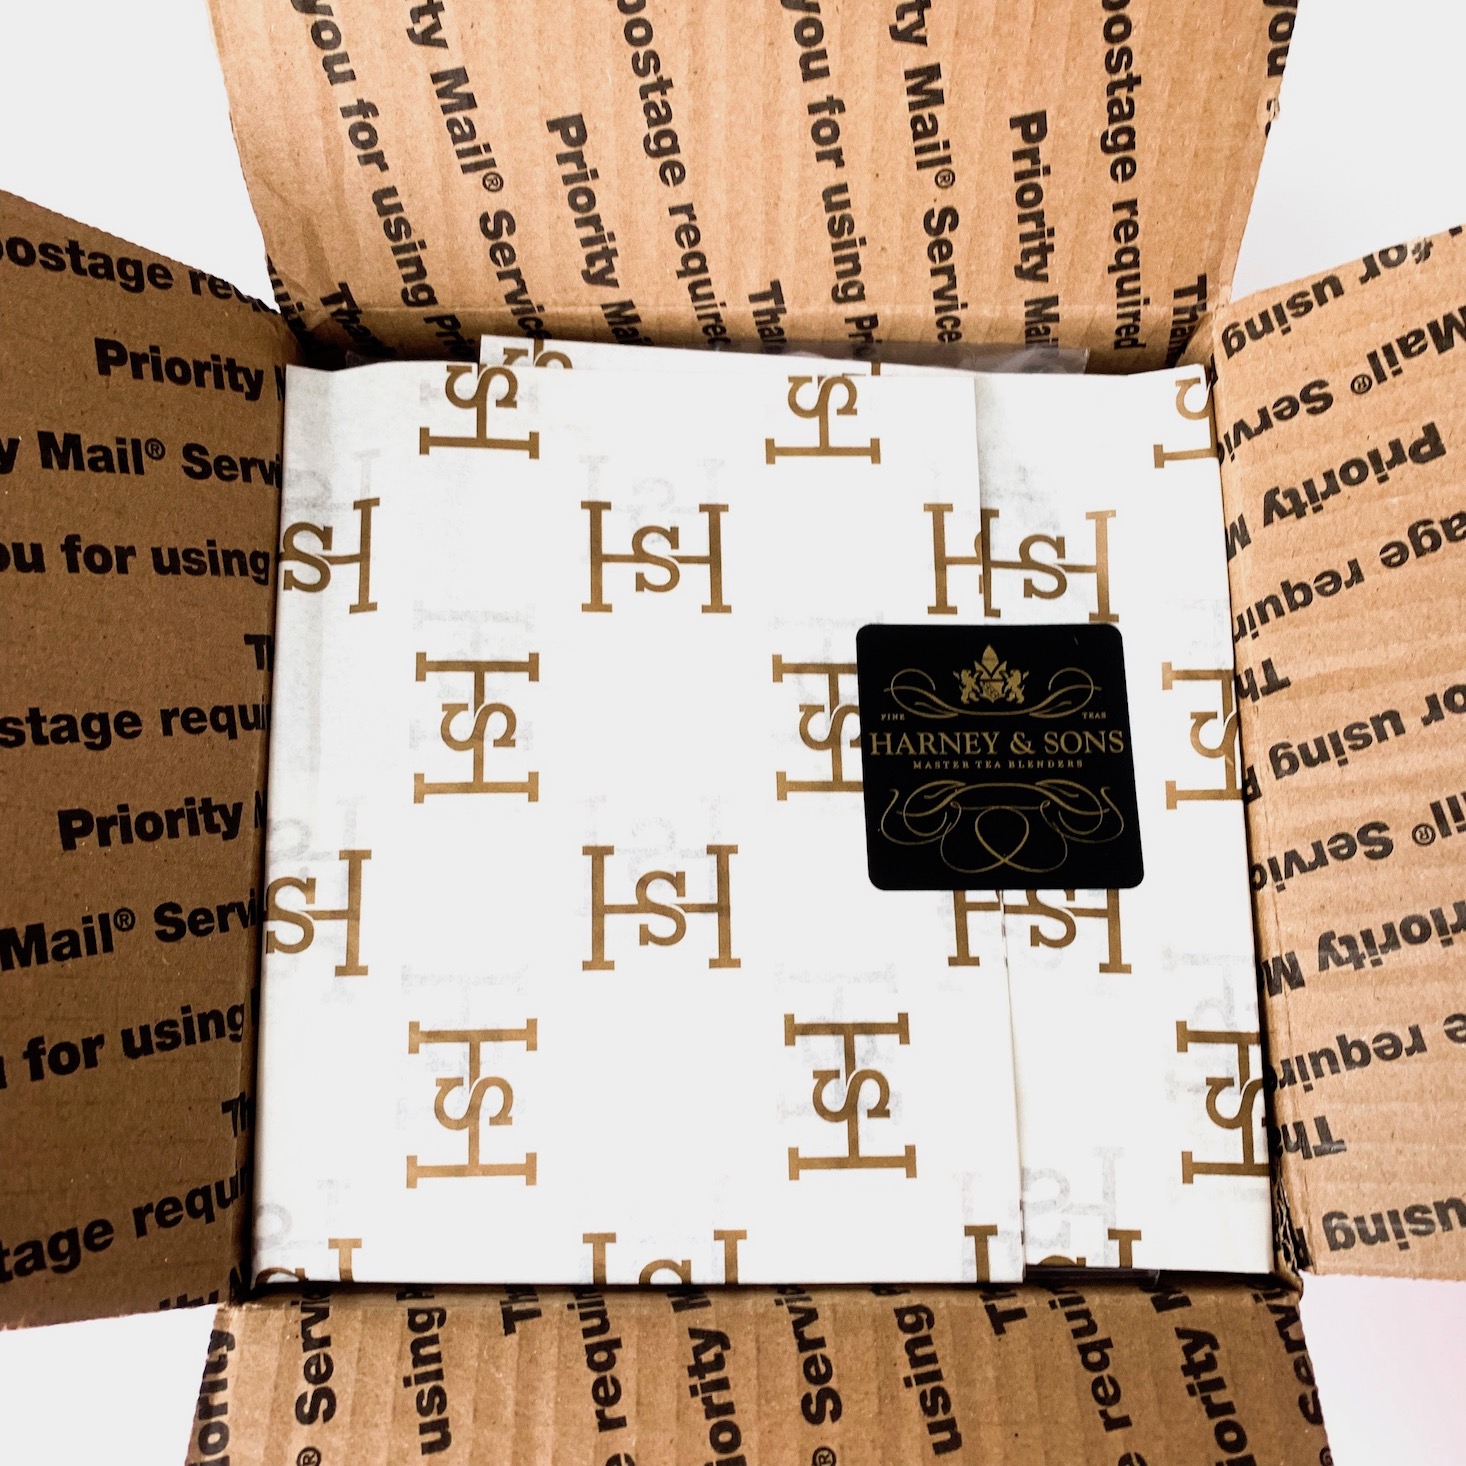 Harney & Sons Premium Sachet Tea Of The Month Review – May 2019